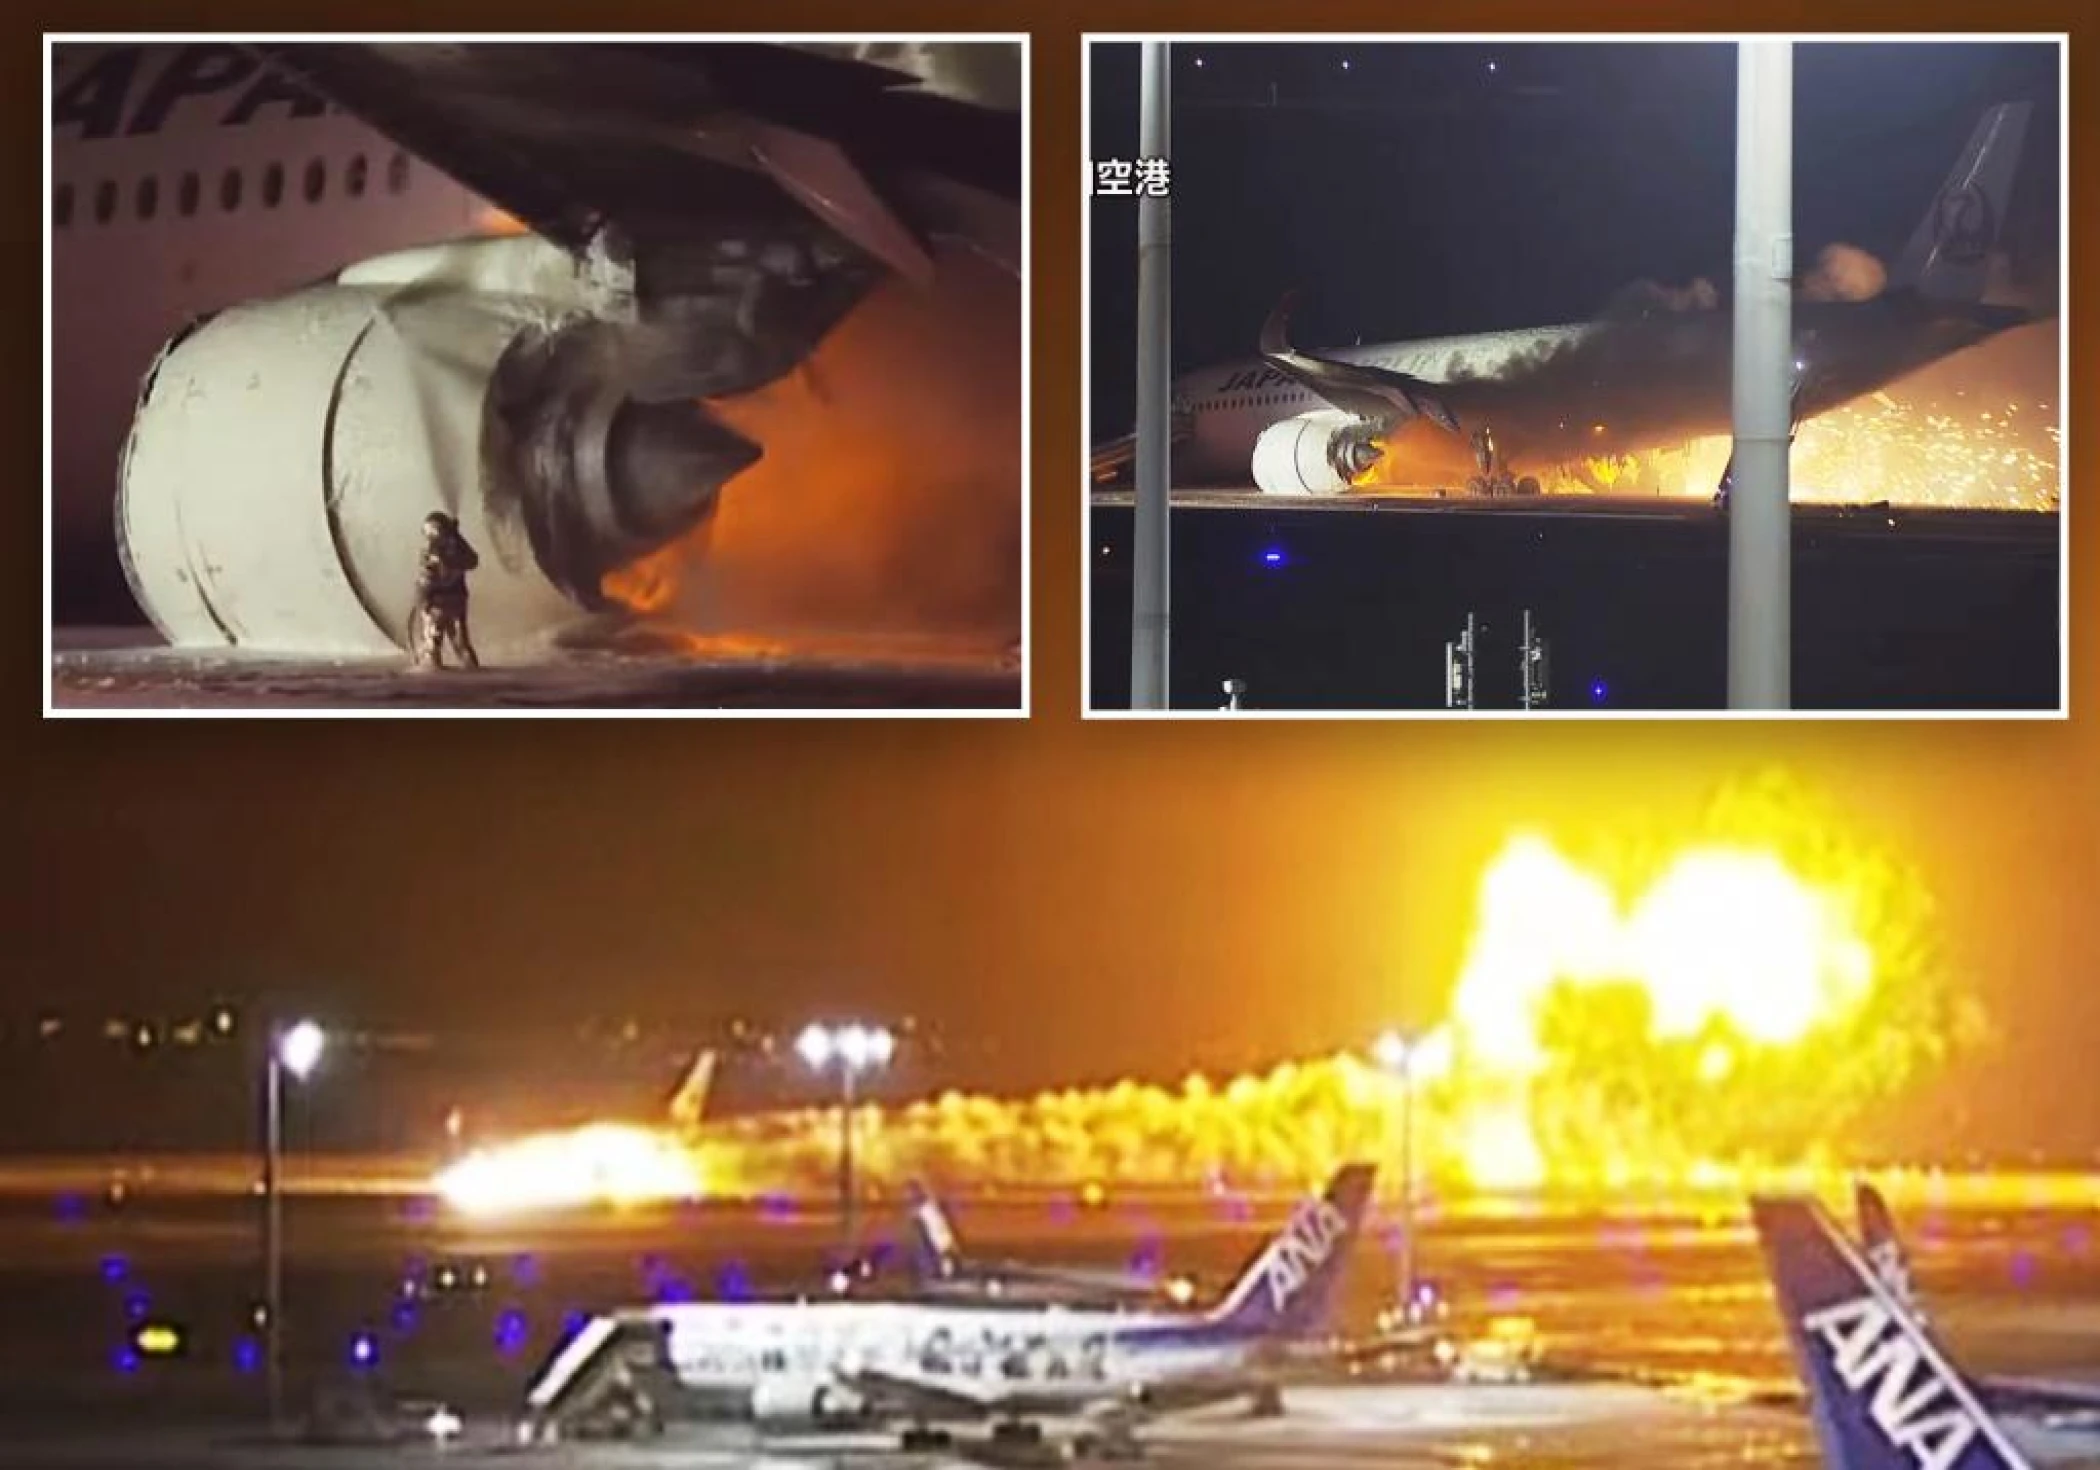 Tokyo Airport Update: Fire caught by Japan Airlines